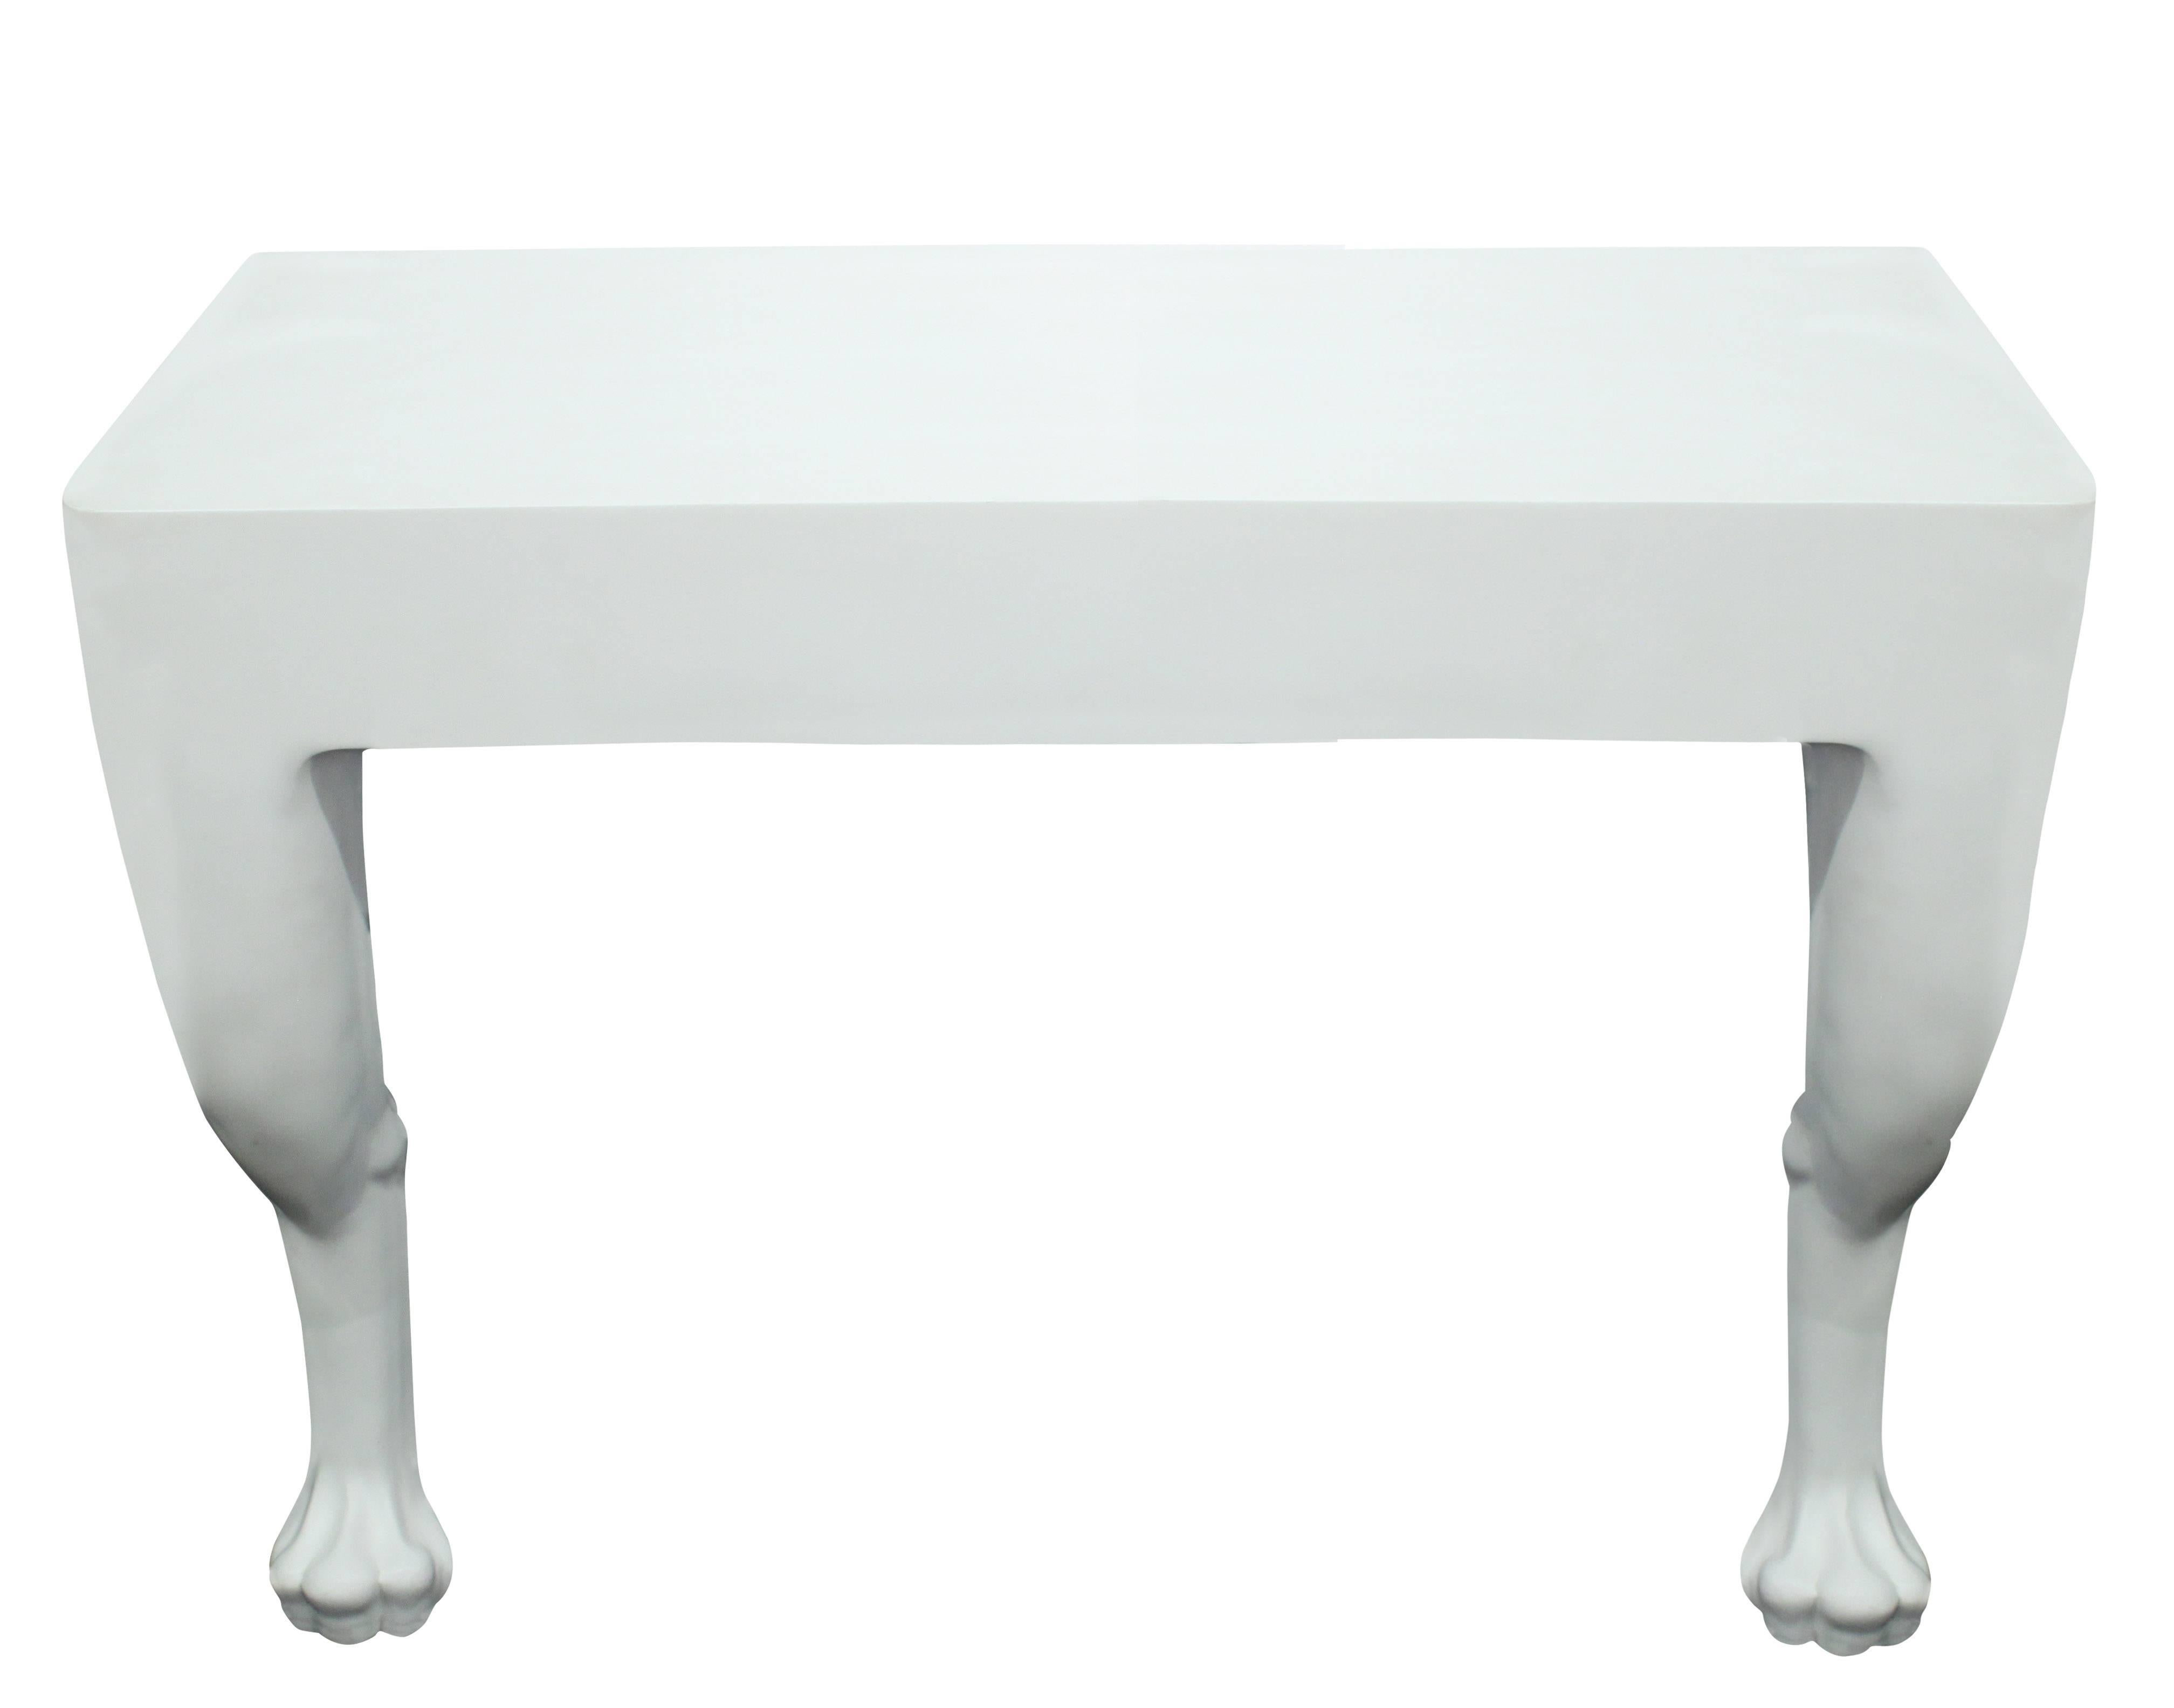 Wall-mounted console table in resin with paws on front legs in the manner of John Dickinson, American, 1980s. This is an exact copy of the original and is indistinguishable. It was made by a resin fabricator in the 1980s.